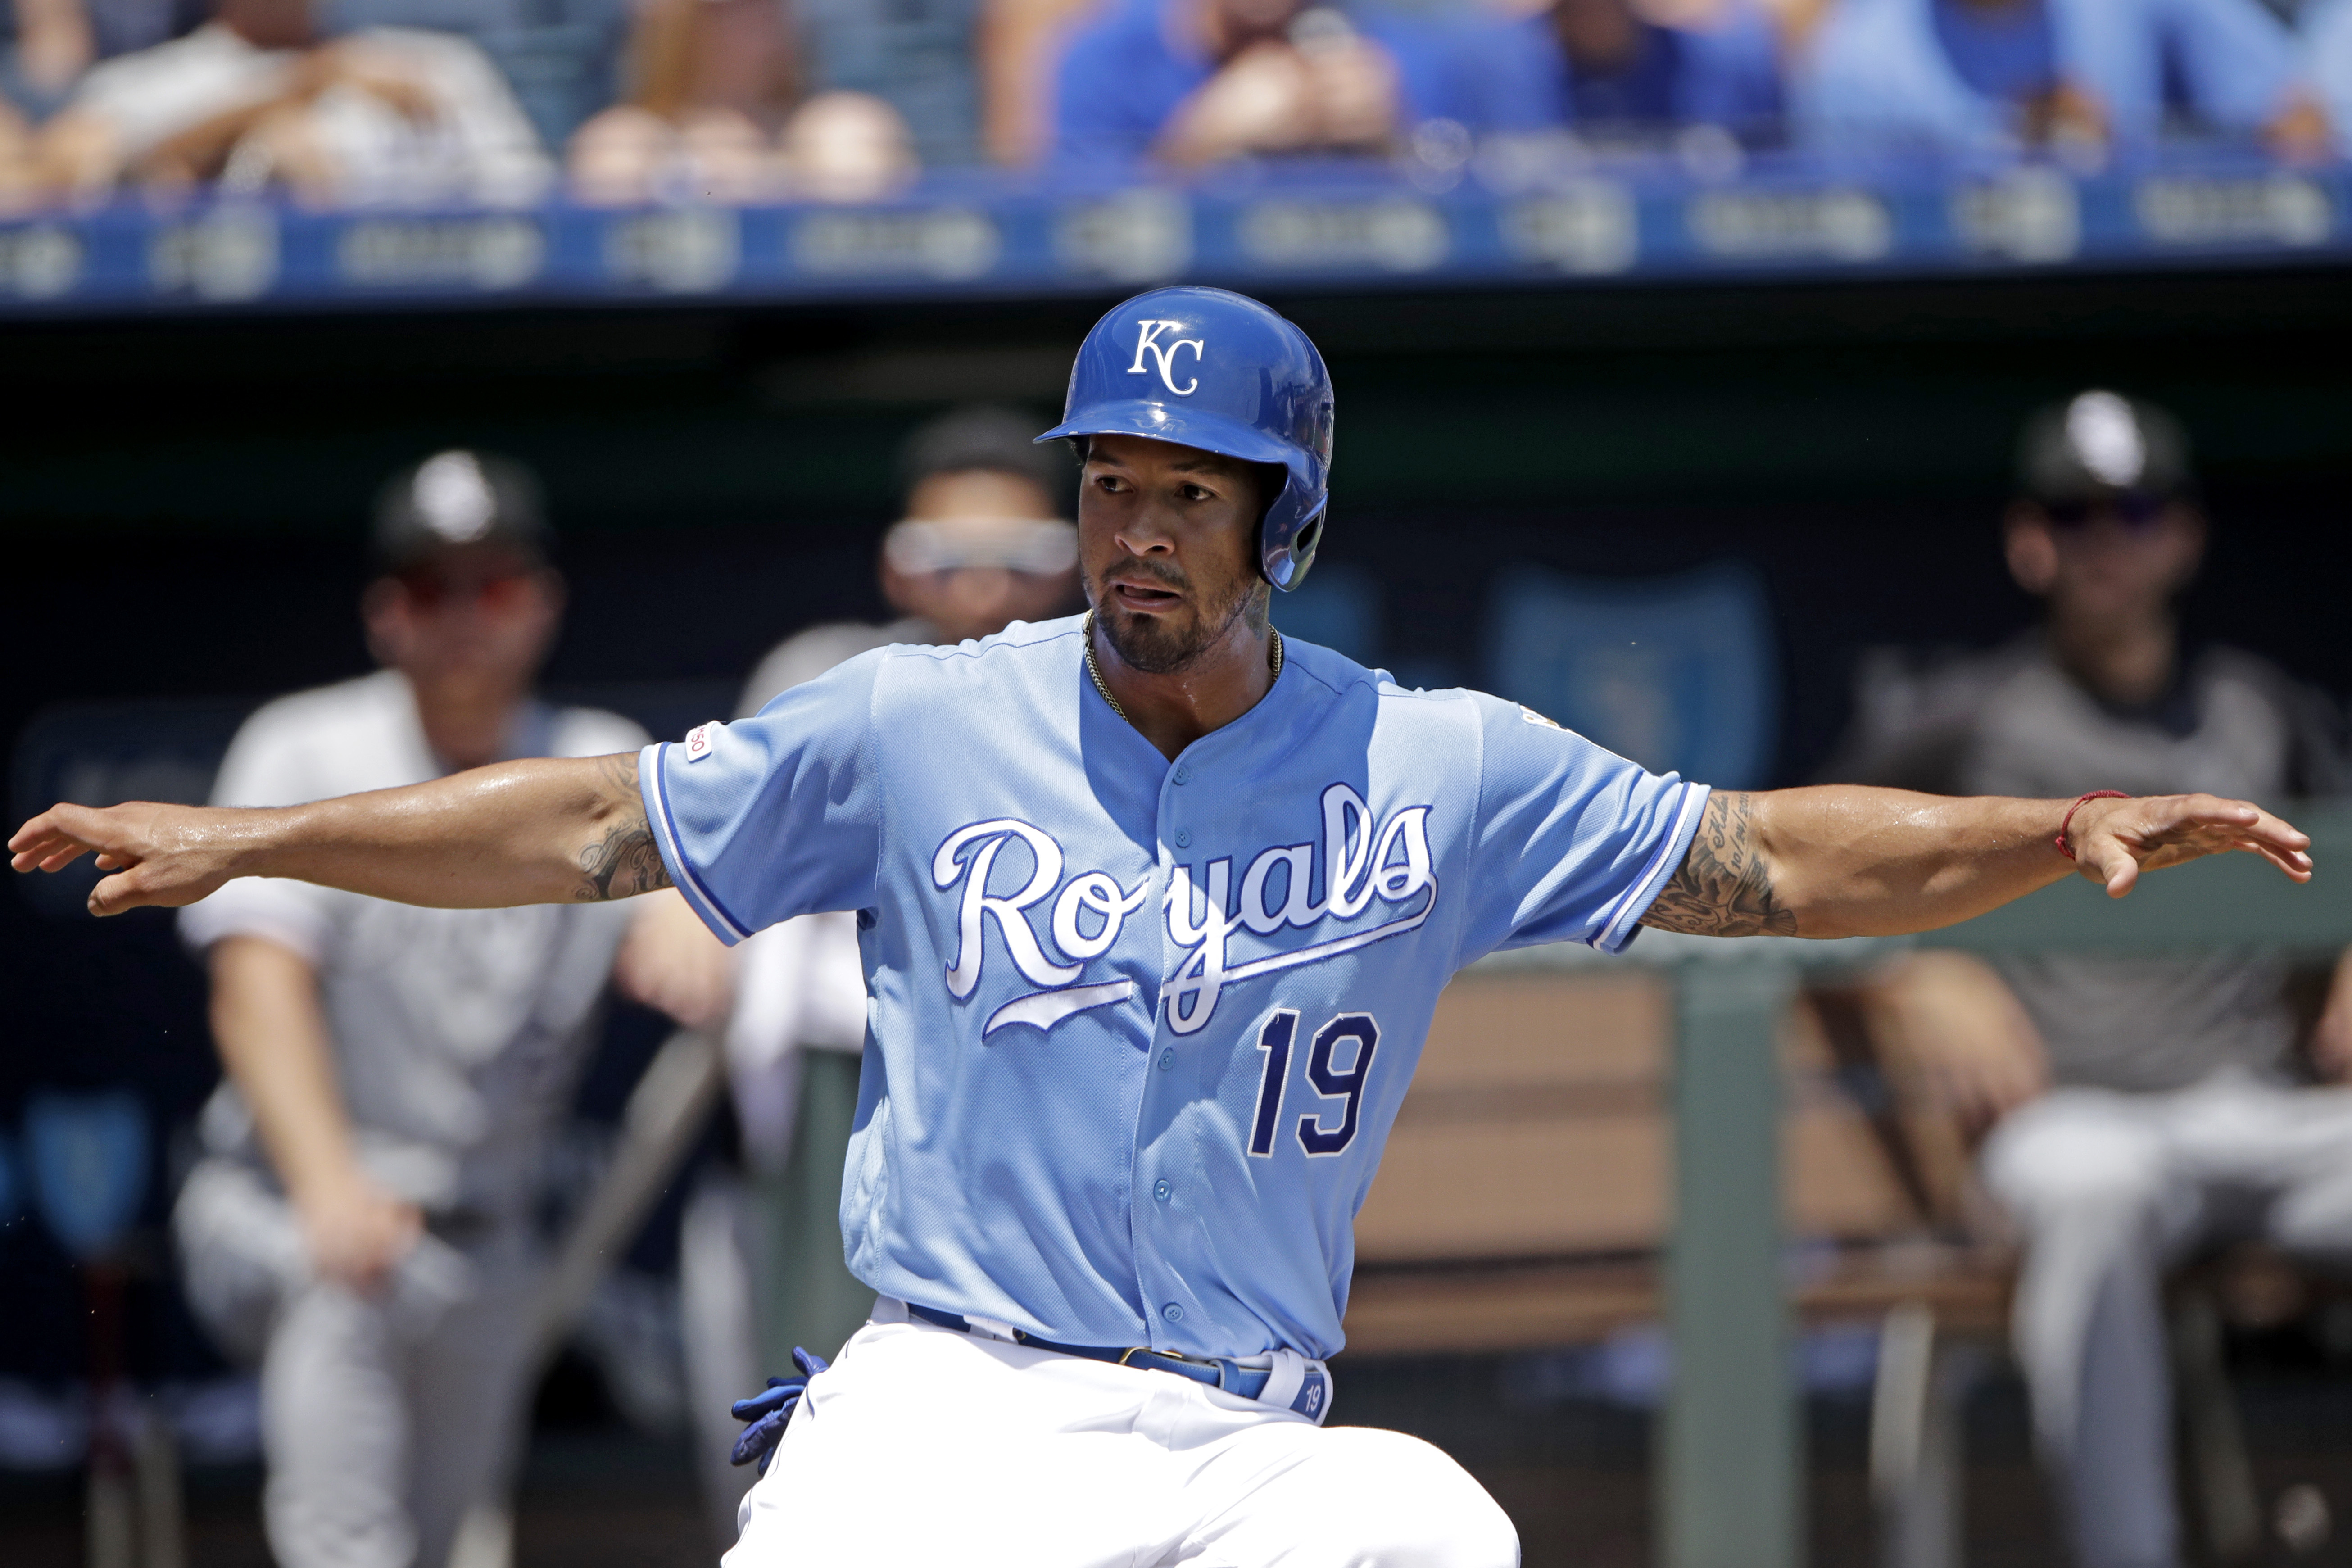 Royals hold off White Sox 6-5 to sweep 4-game series